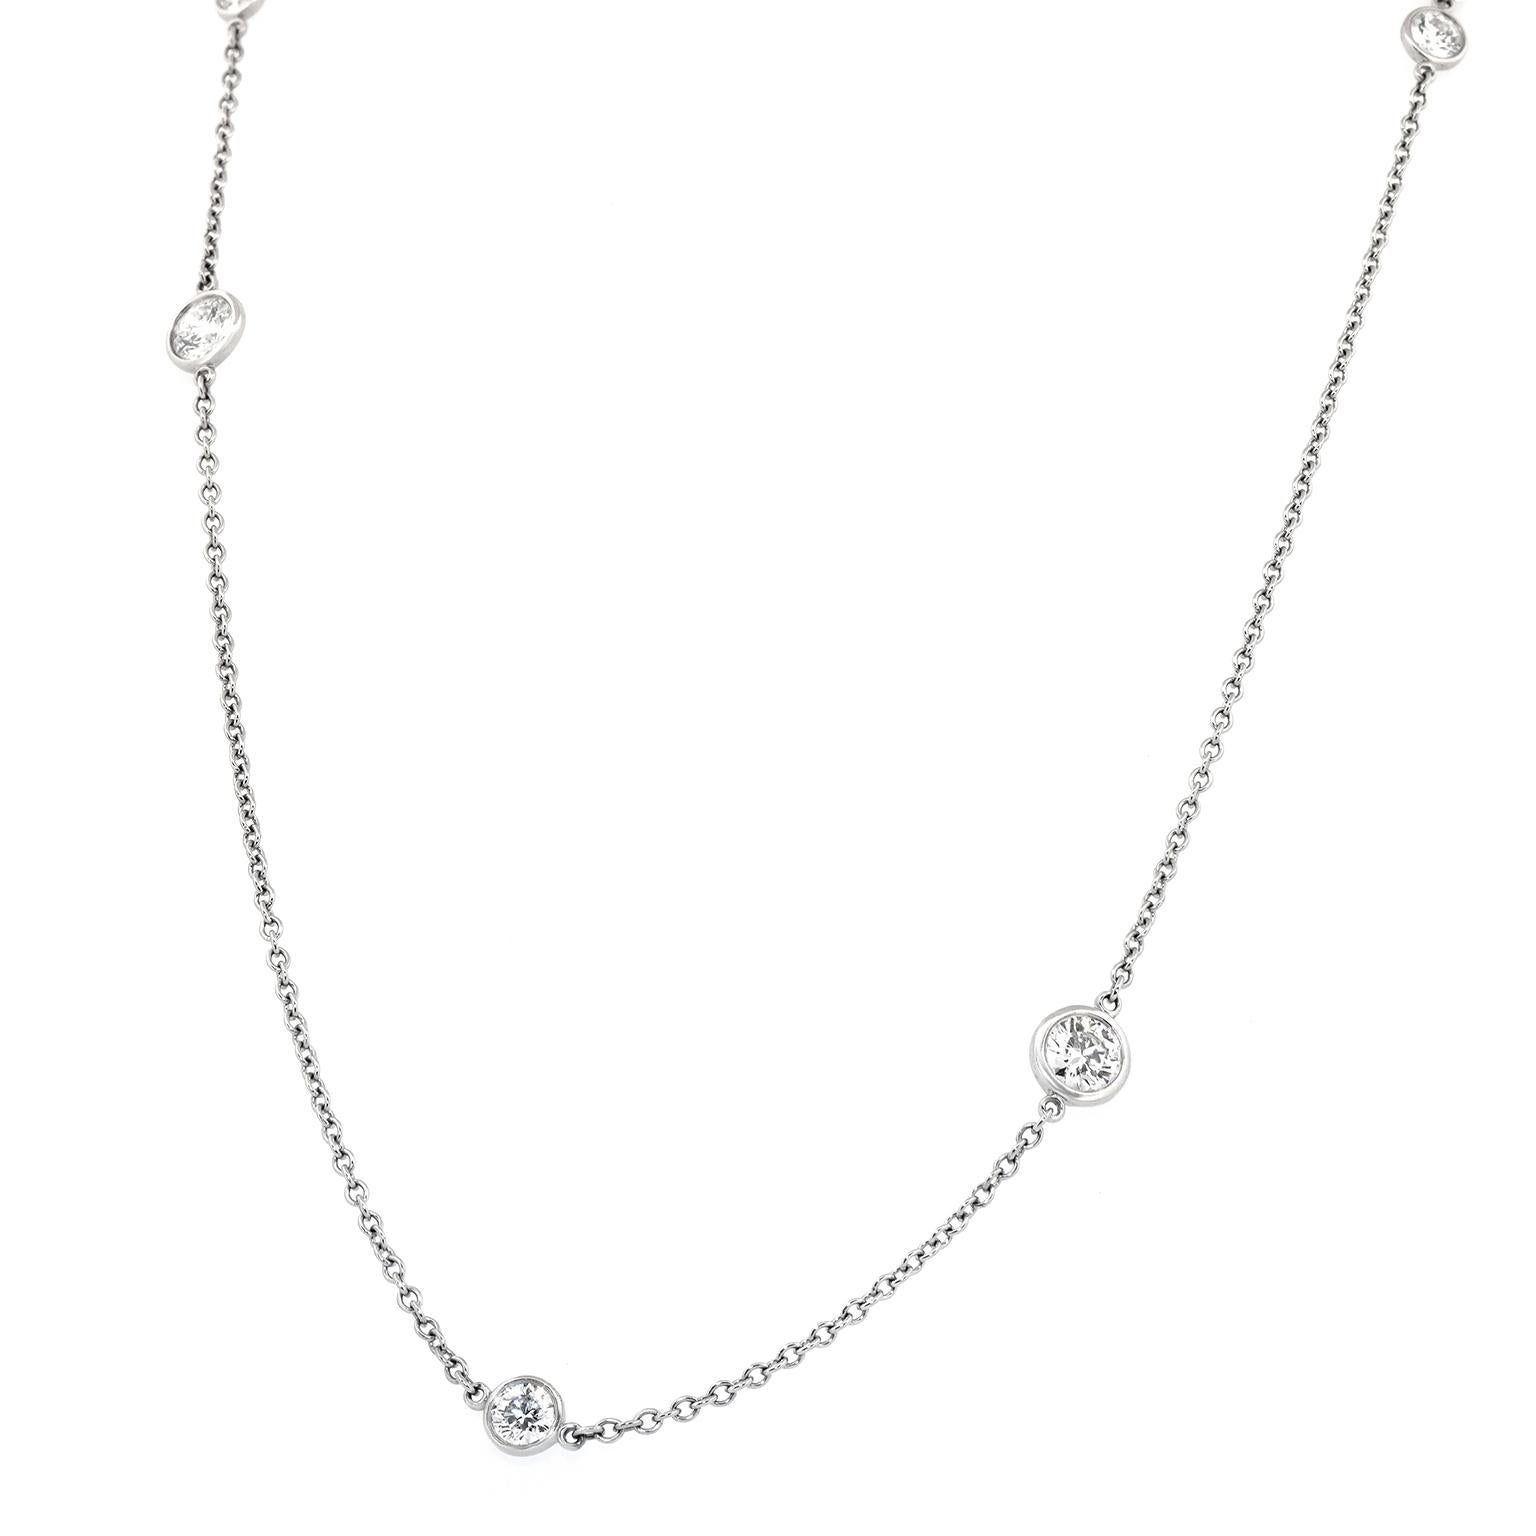 Platinum Diamonds by the Yard Sprinkle Necklace by Elsa Peretti for Tiffany & Co For Sale 1